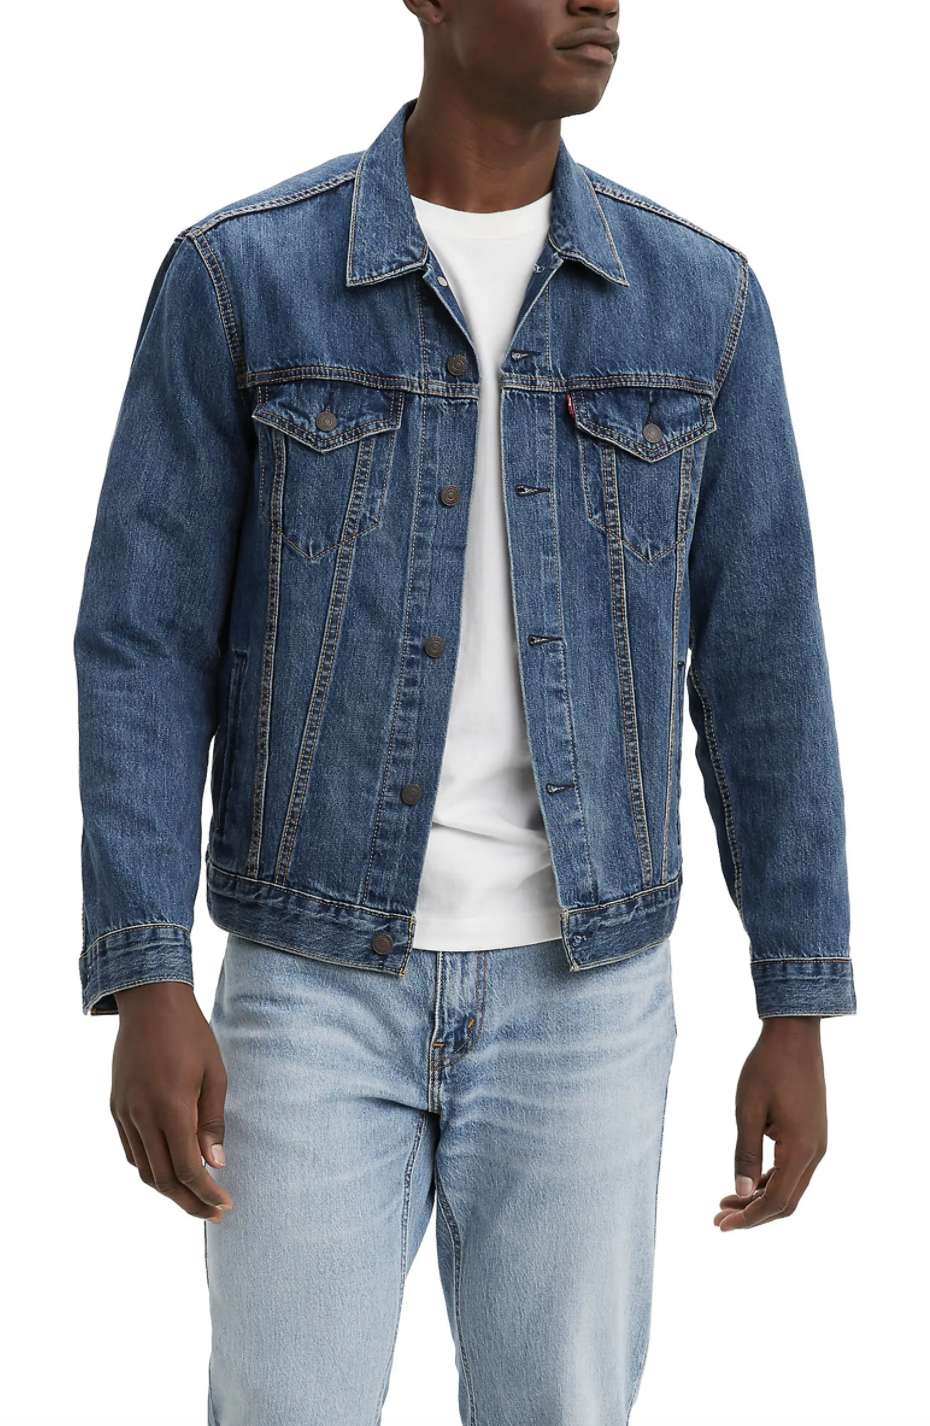 How to Wear a Denim Jacket  The Art of Manliness